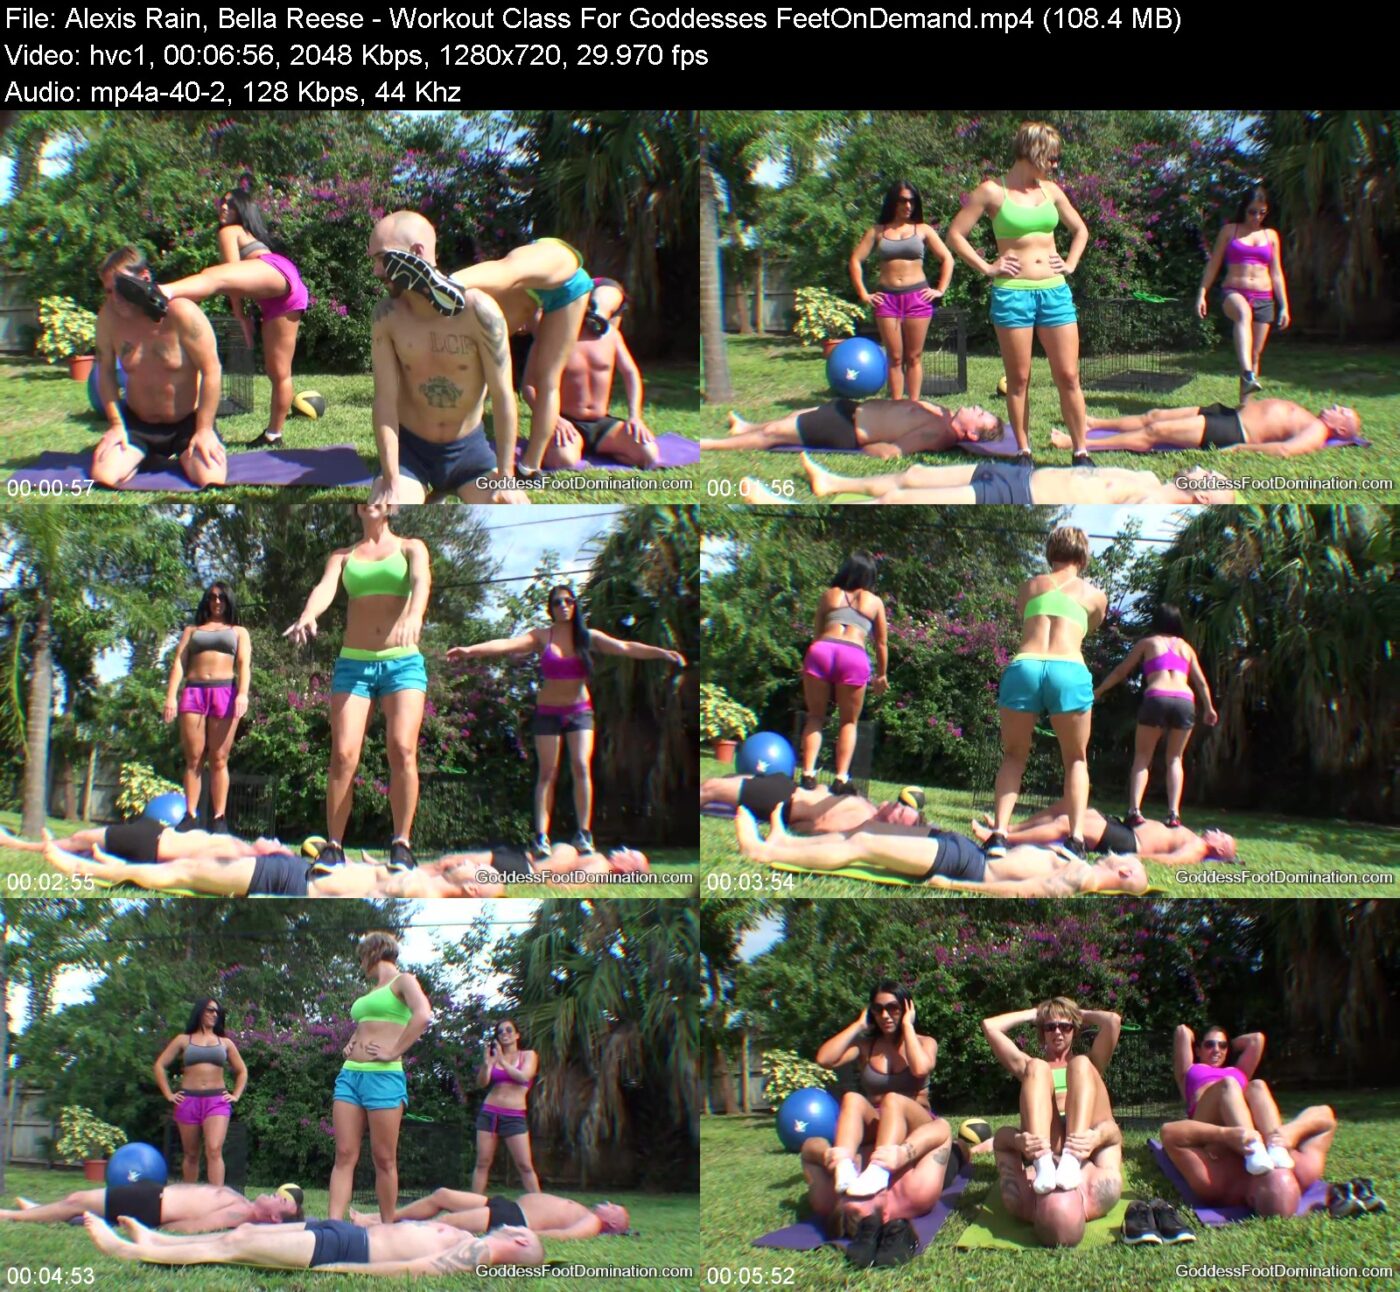 Actress: Alexis Rain, Bella Reese. Title and Studio: Workout Class For Goddesses FeetOnDemand